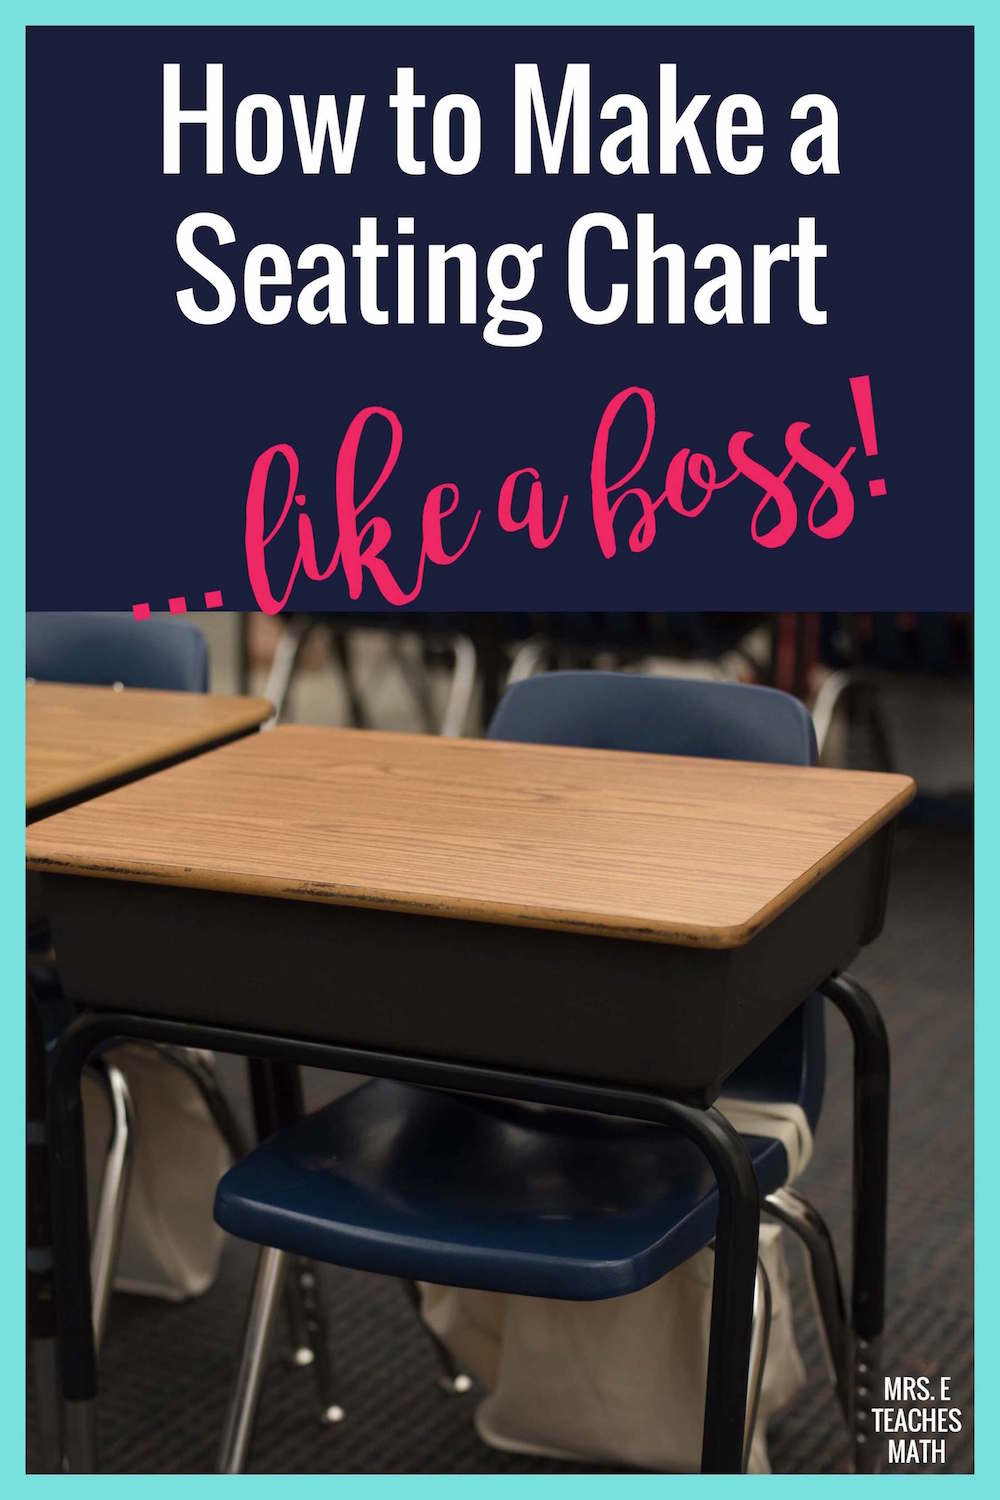 Making A Seating Chart For The Classroom